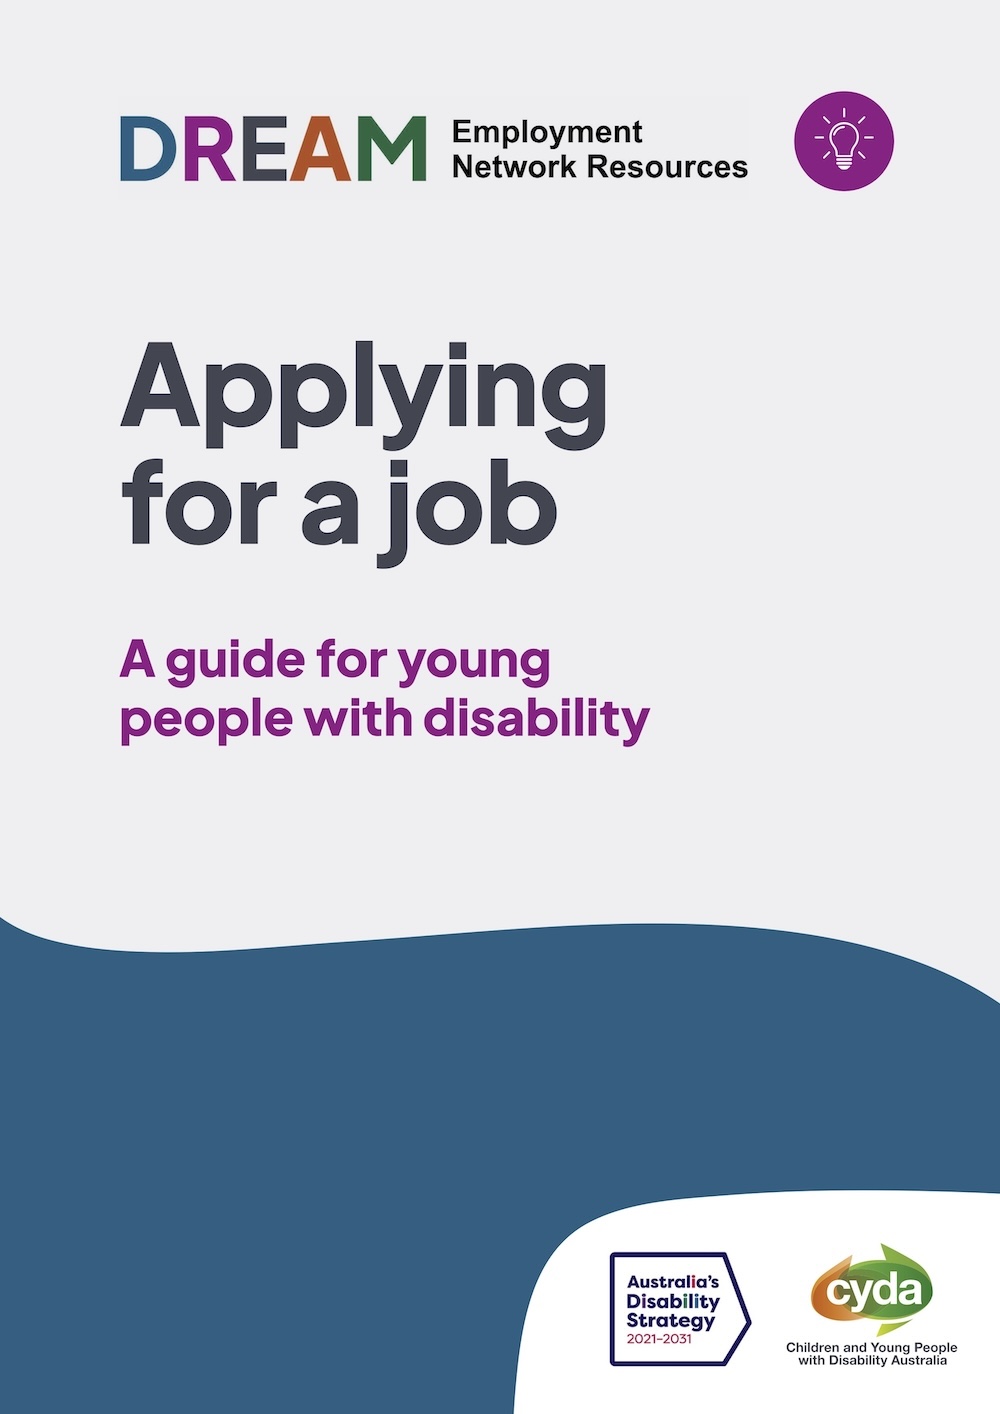 PDF Cover titled "Applying for a jobk, a guide for young people with disability" with the logo for the DREAM Employment Network with a purple lightbulb graphic up the top, and the logos for the Australian Disability Strategy and CYDA down the bottom.